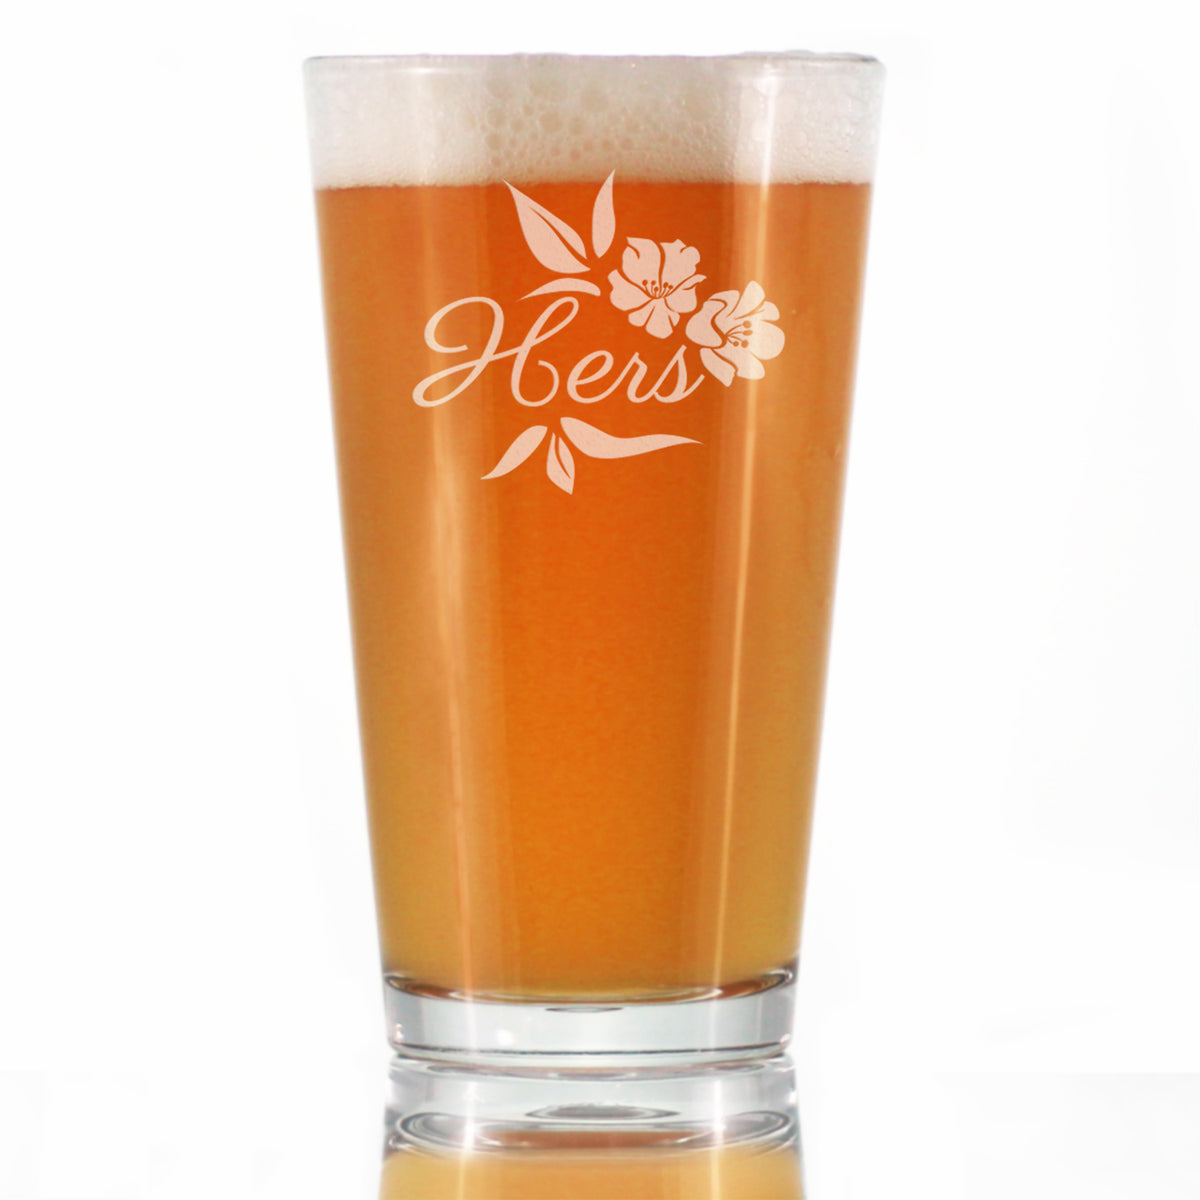 Hers Pint Glass - Unique Wedding Gift for Bride - Cute Engraved Wedding Cup Gift